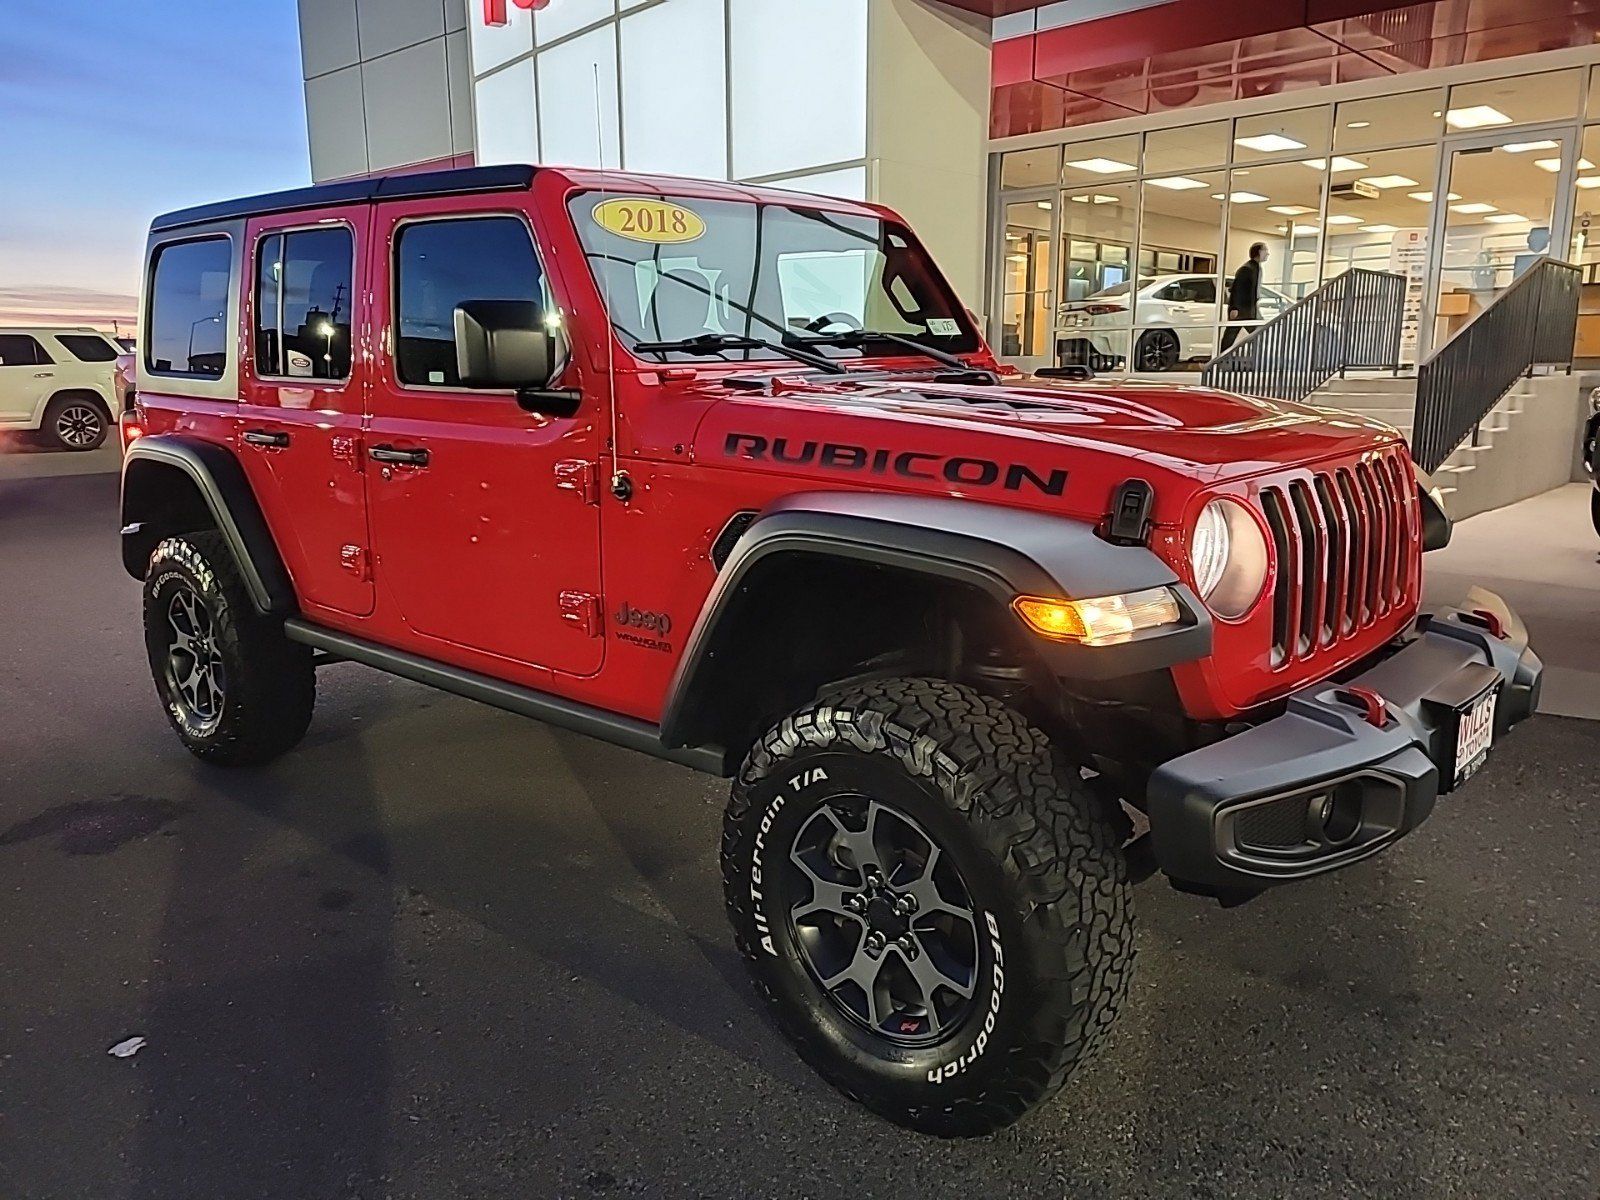 2018 - Jeep - Wrangler Unlimited - $40,748